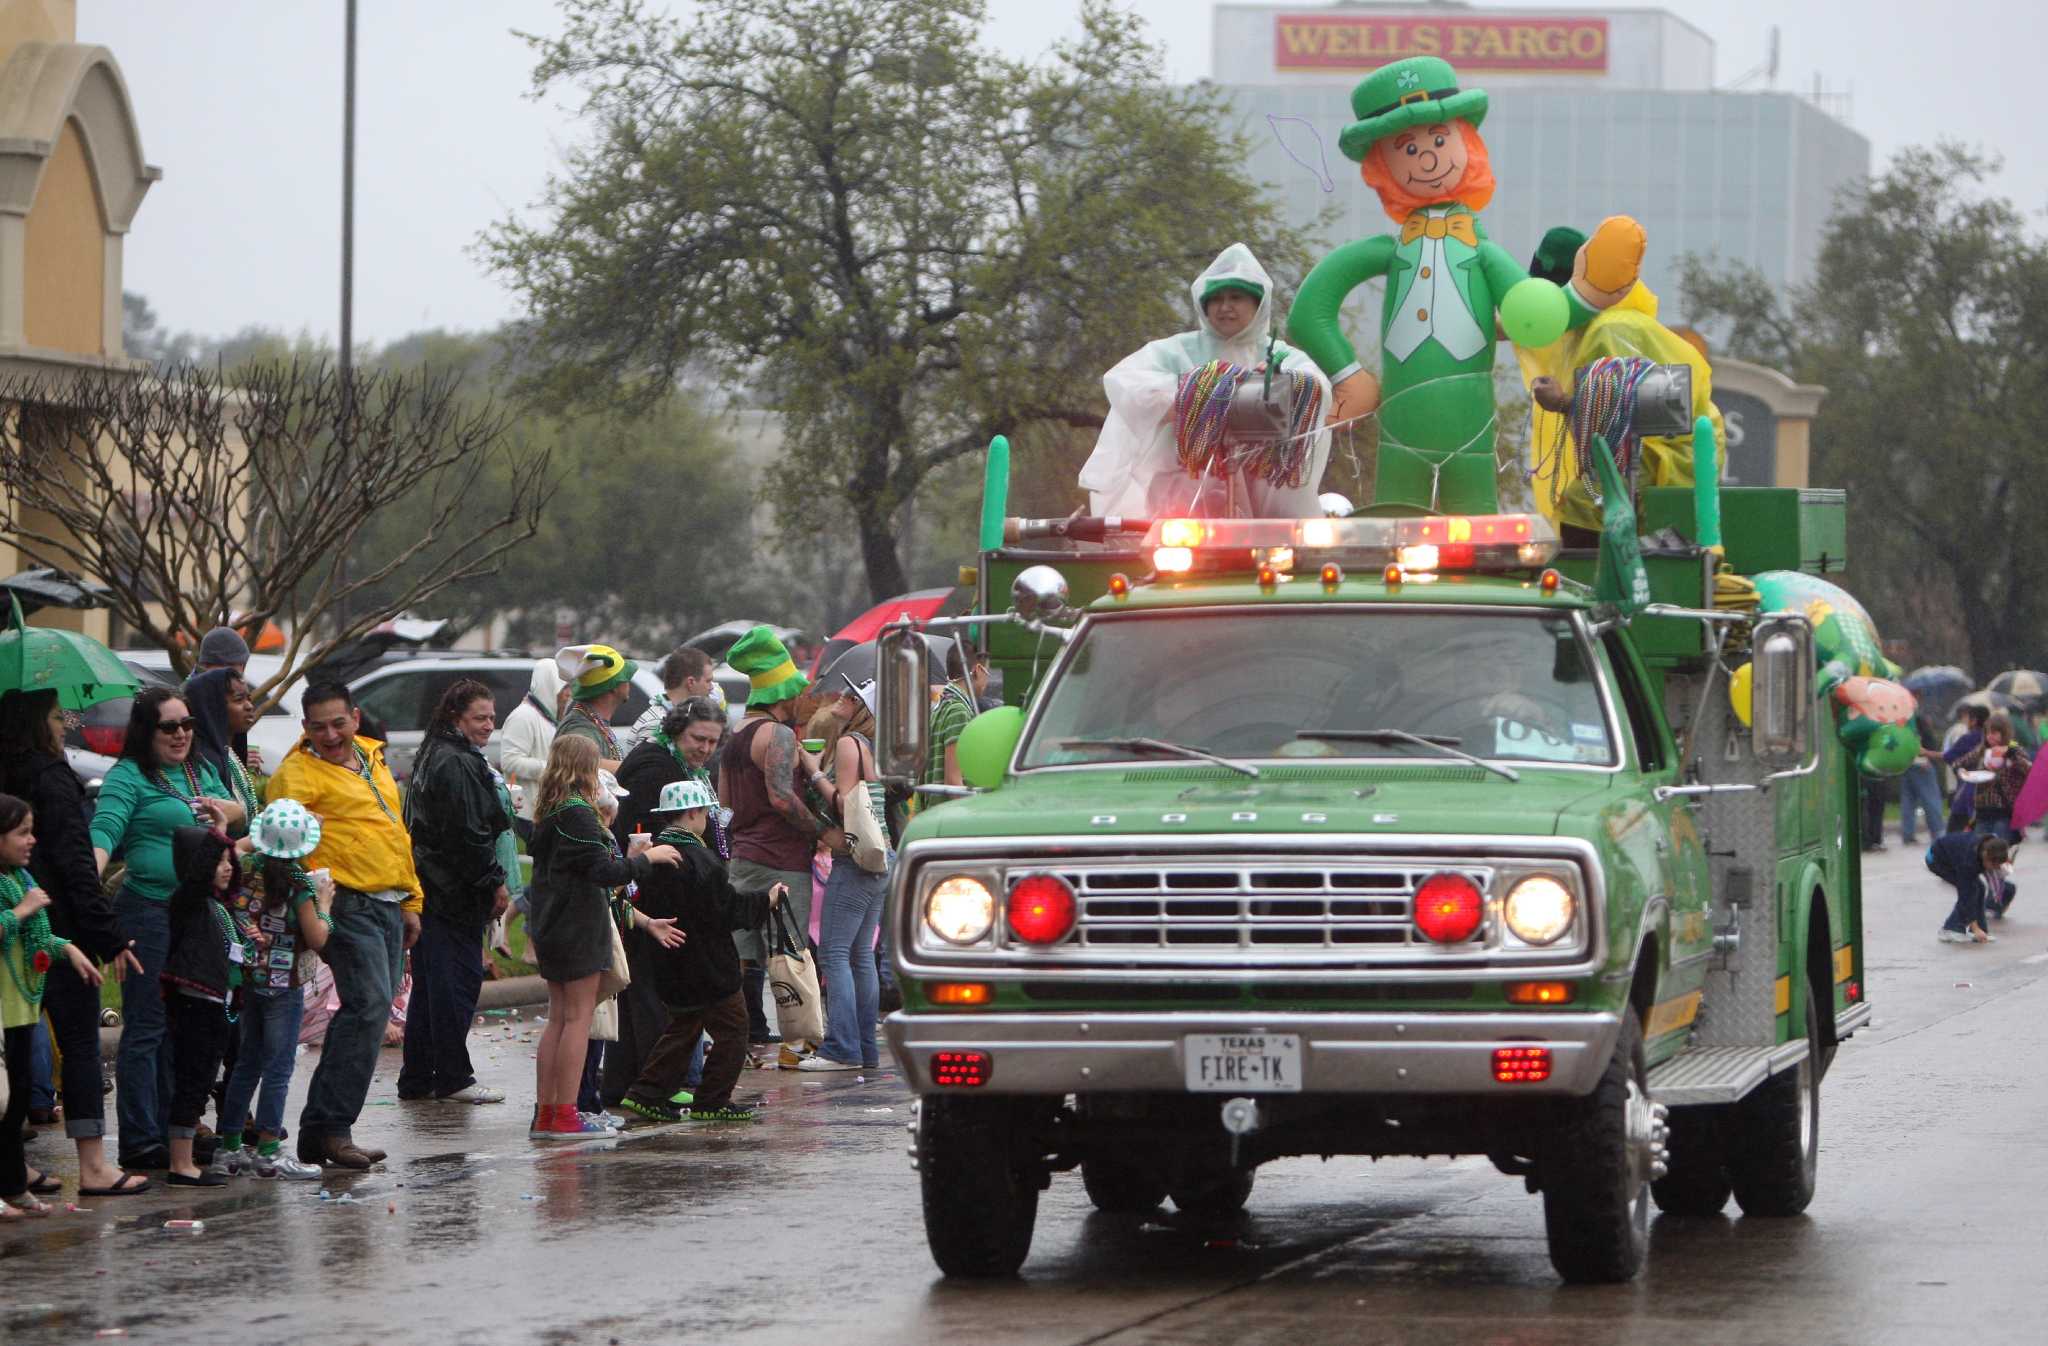 Annual FM 1960 St. Patrick's Day Parade brings out party spirit - Houston Chronicle